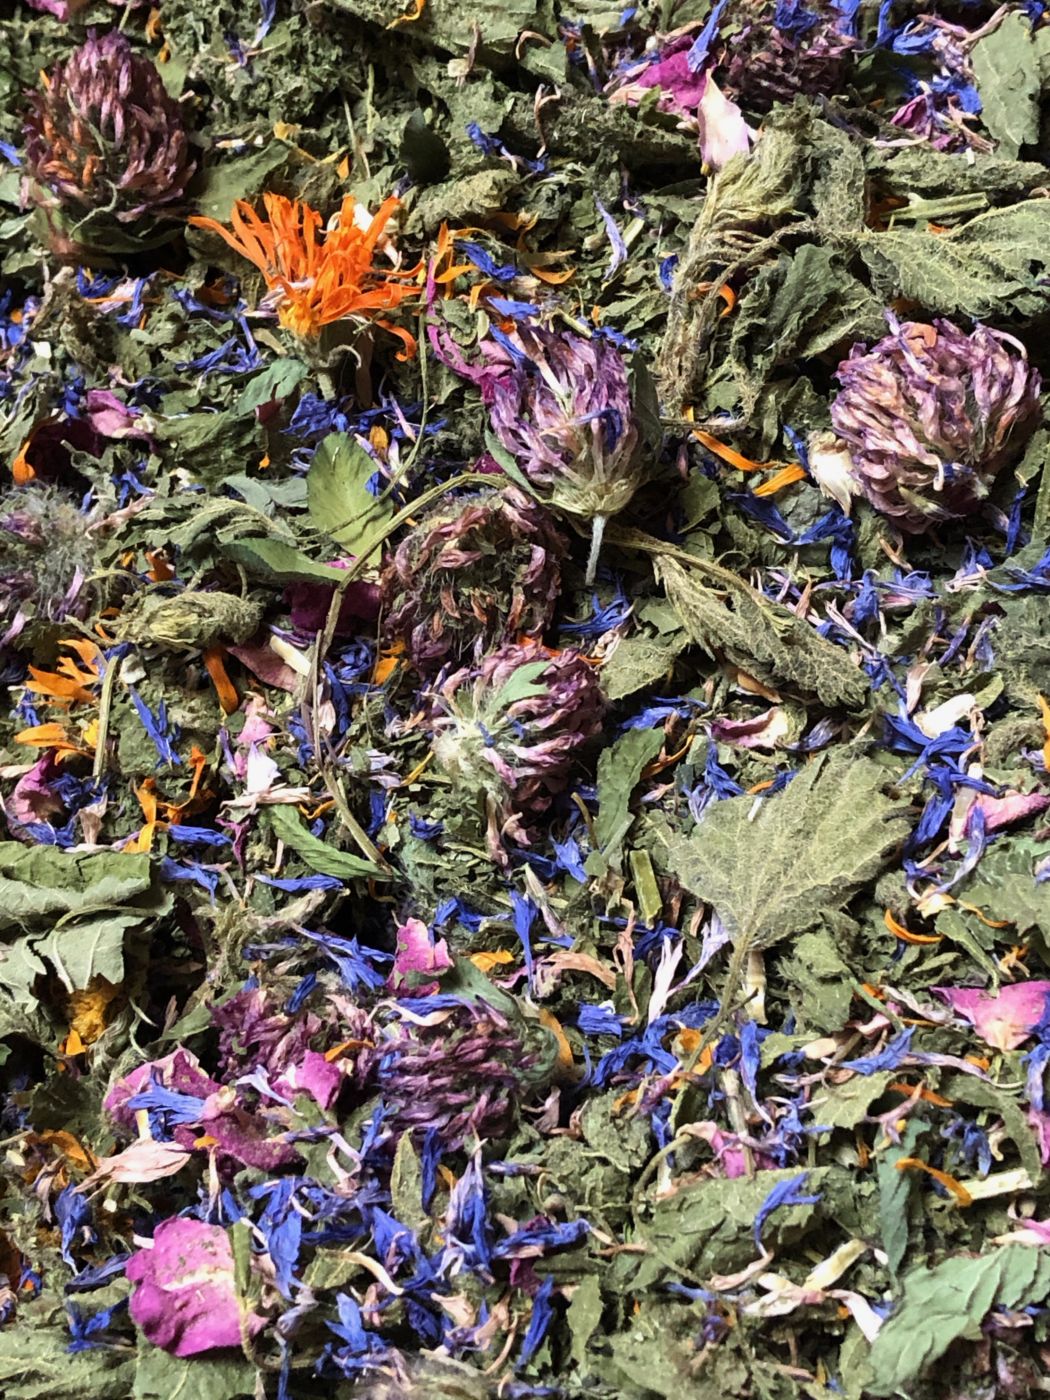 You can use either fresh or dried herbs in your ceremony. Pictured here is blend of dried nettle (Urtica dioica), lemon balm (Melissa officianlis), anise hyssop (Agastache foeniculum), bachelor button (Centaurea cyanus), red clover (Trifolium pratense), rose (Rosa spp.), and calendula (Calendula officinalis) served in an Appalachian Tea Ceremony.